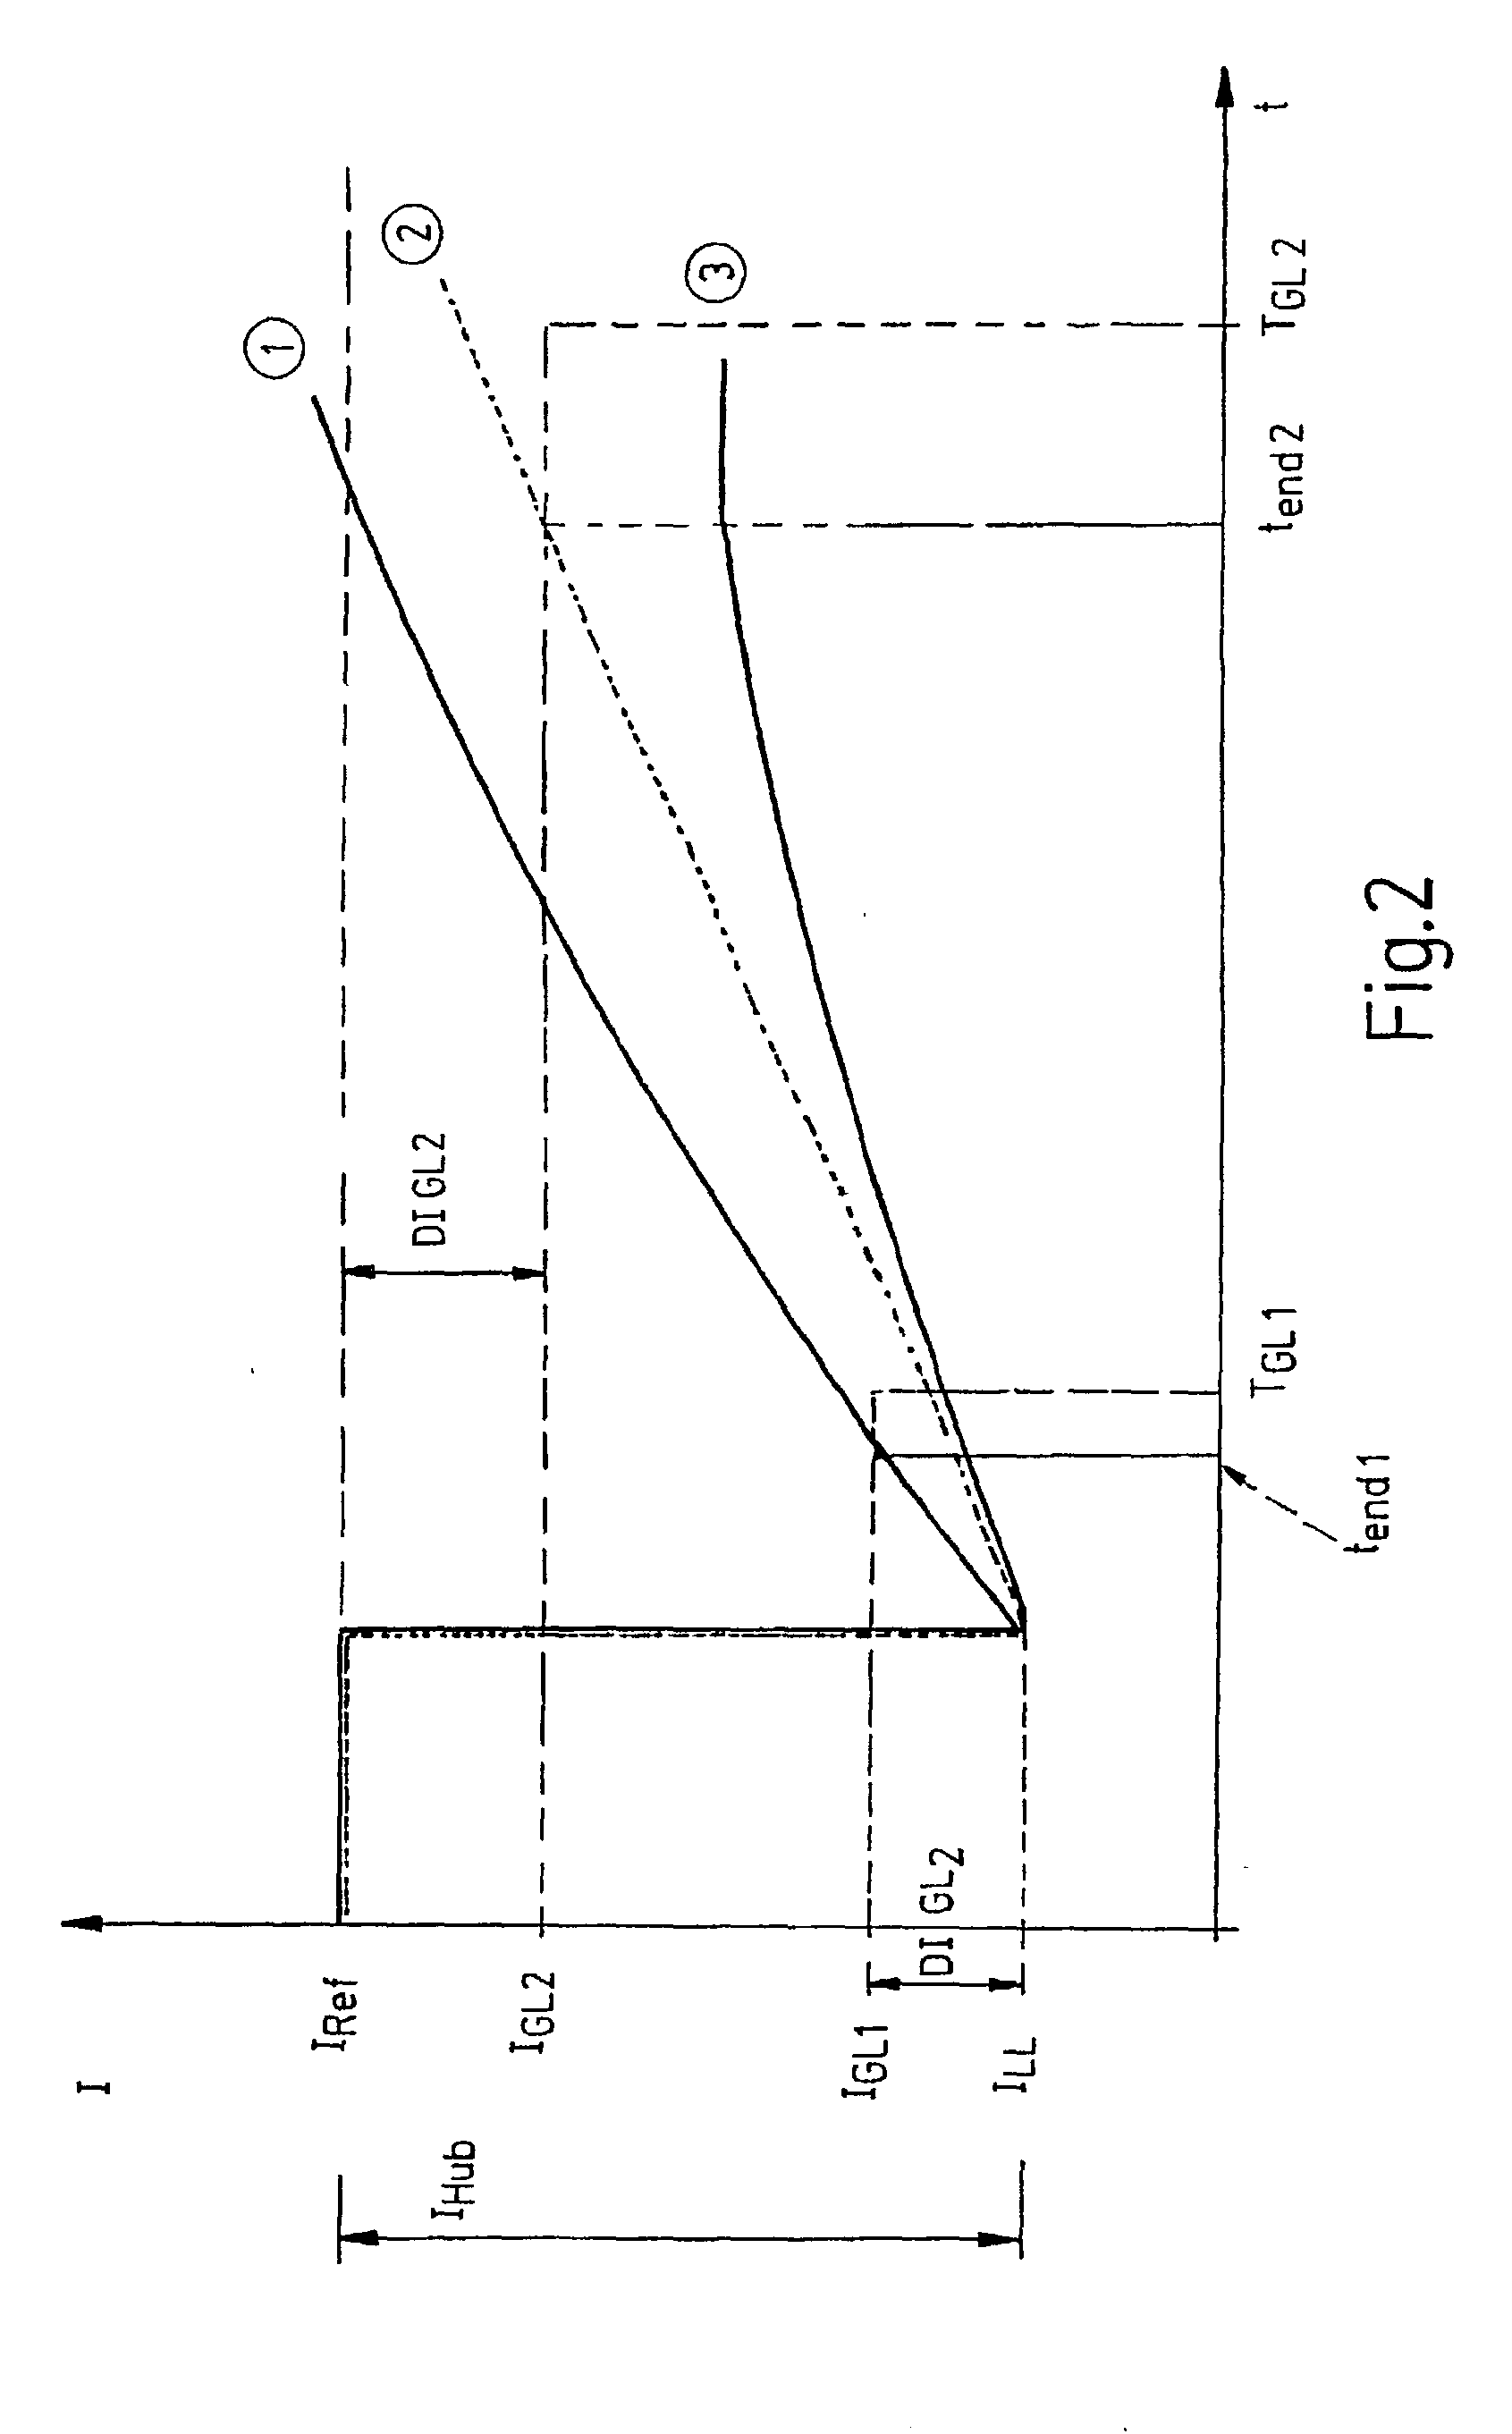 Method for verifying the tightness of a tank system in a motor vehicle